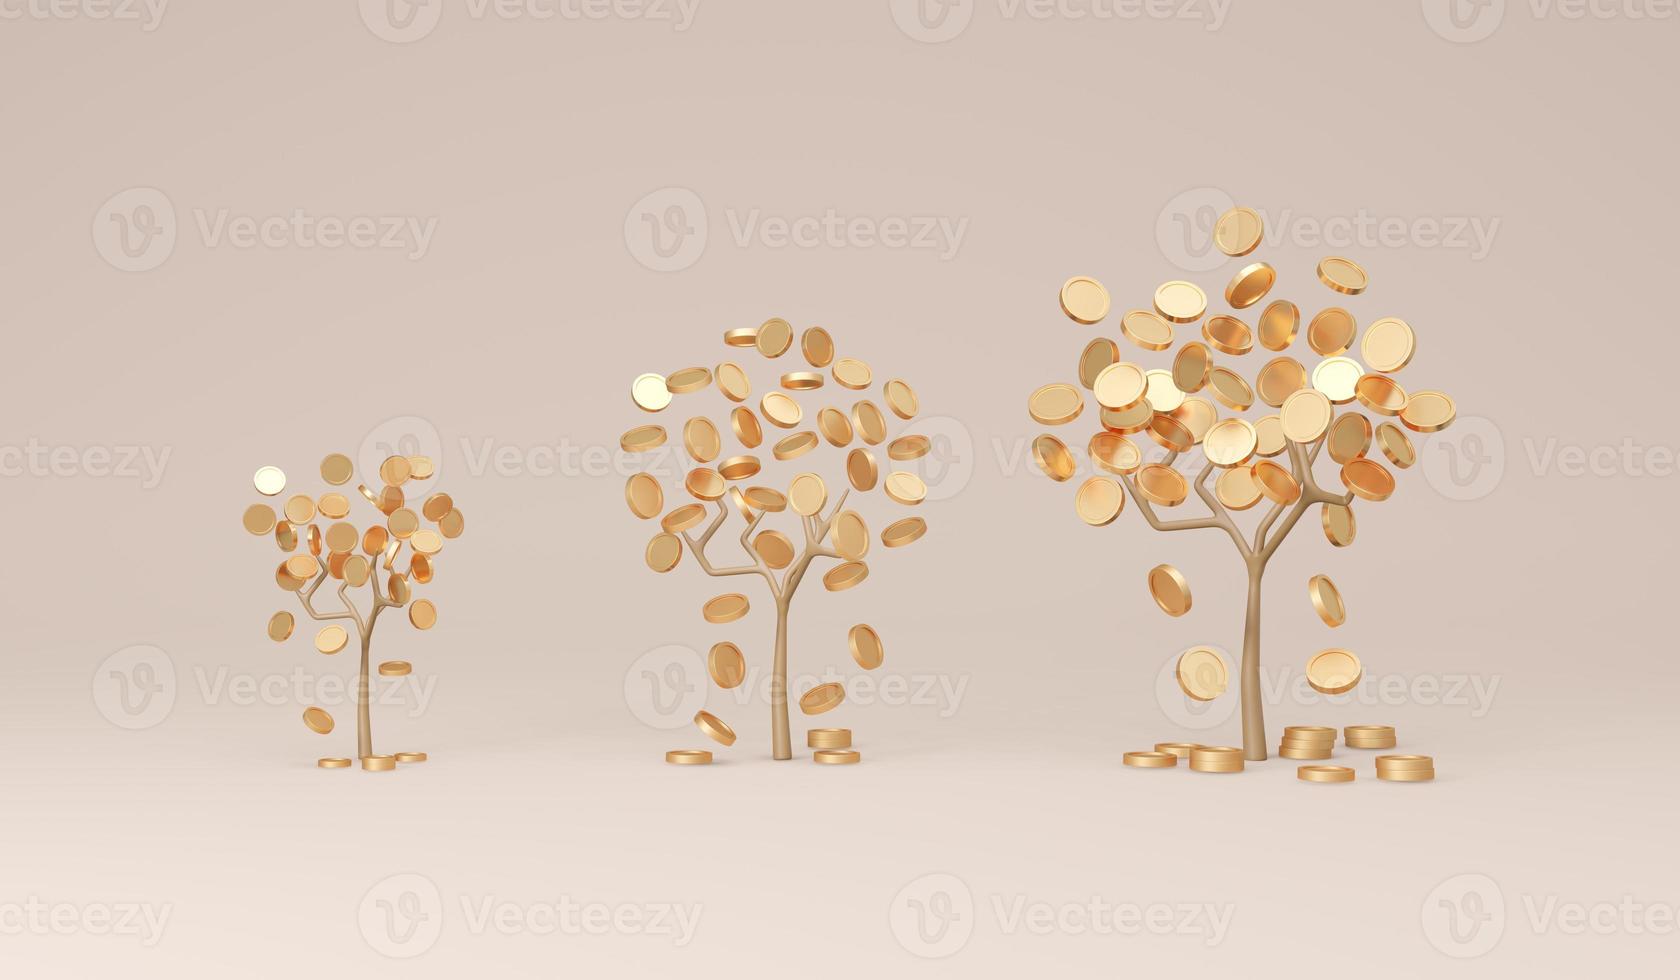 3D Rendering trees with coins falling down from small to big in gold theme on background concept of money tree financial investment. 3D Render illustration. Economic growth. photo